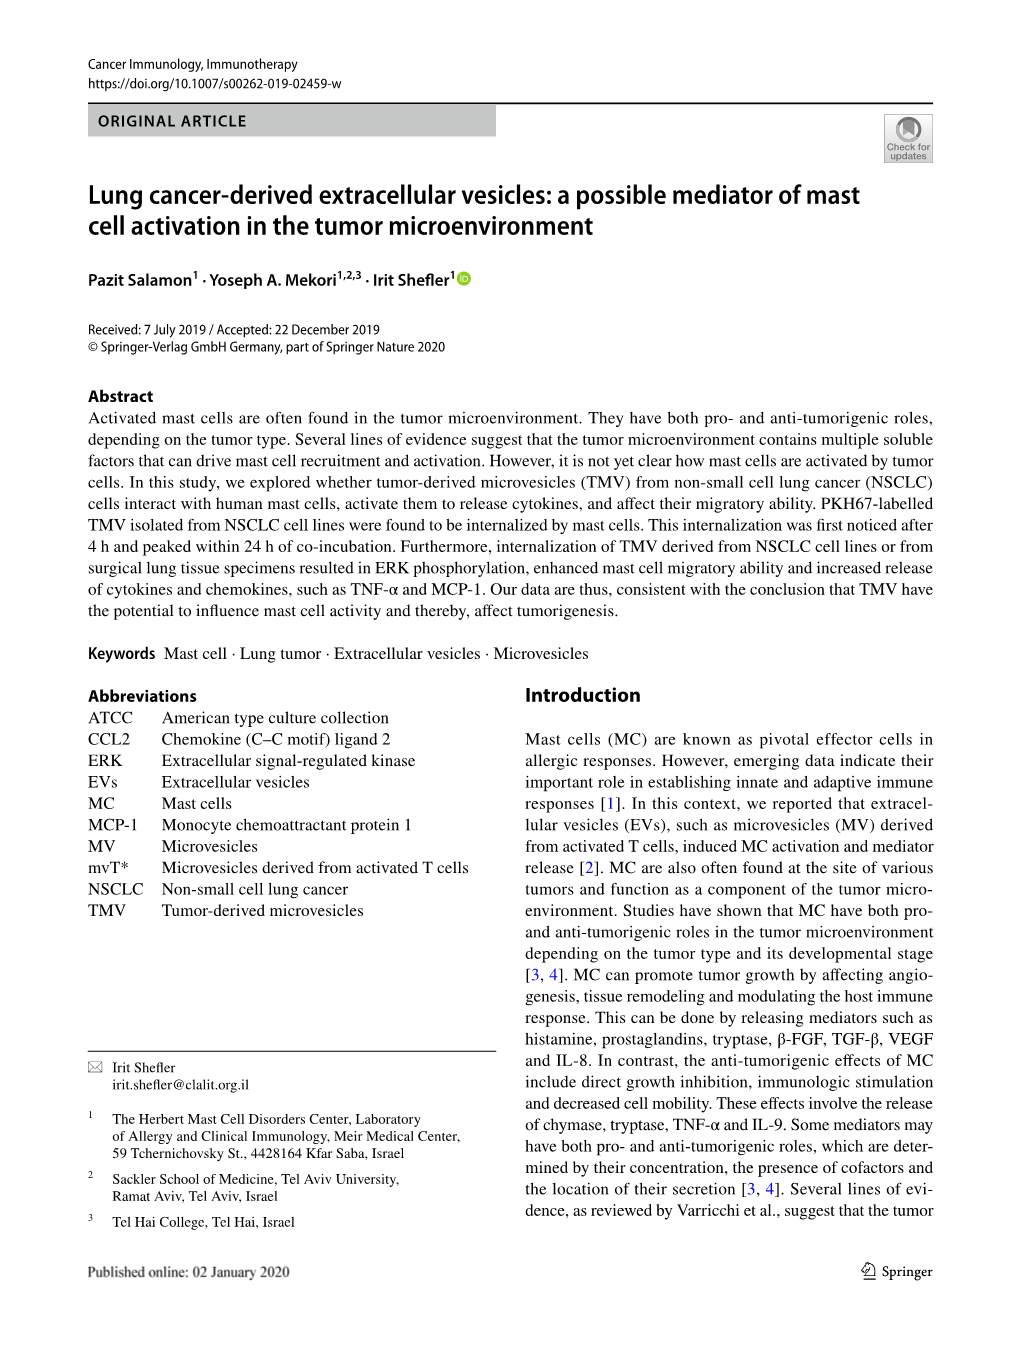 Lung Cancer-Derived Extracellular Vesicles: a Possible Mediator Of